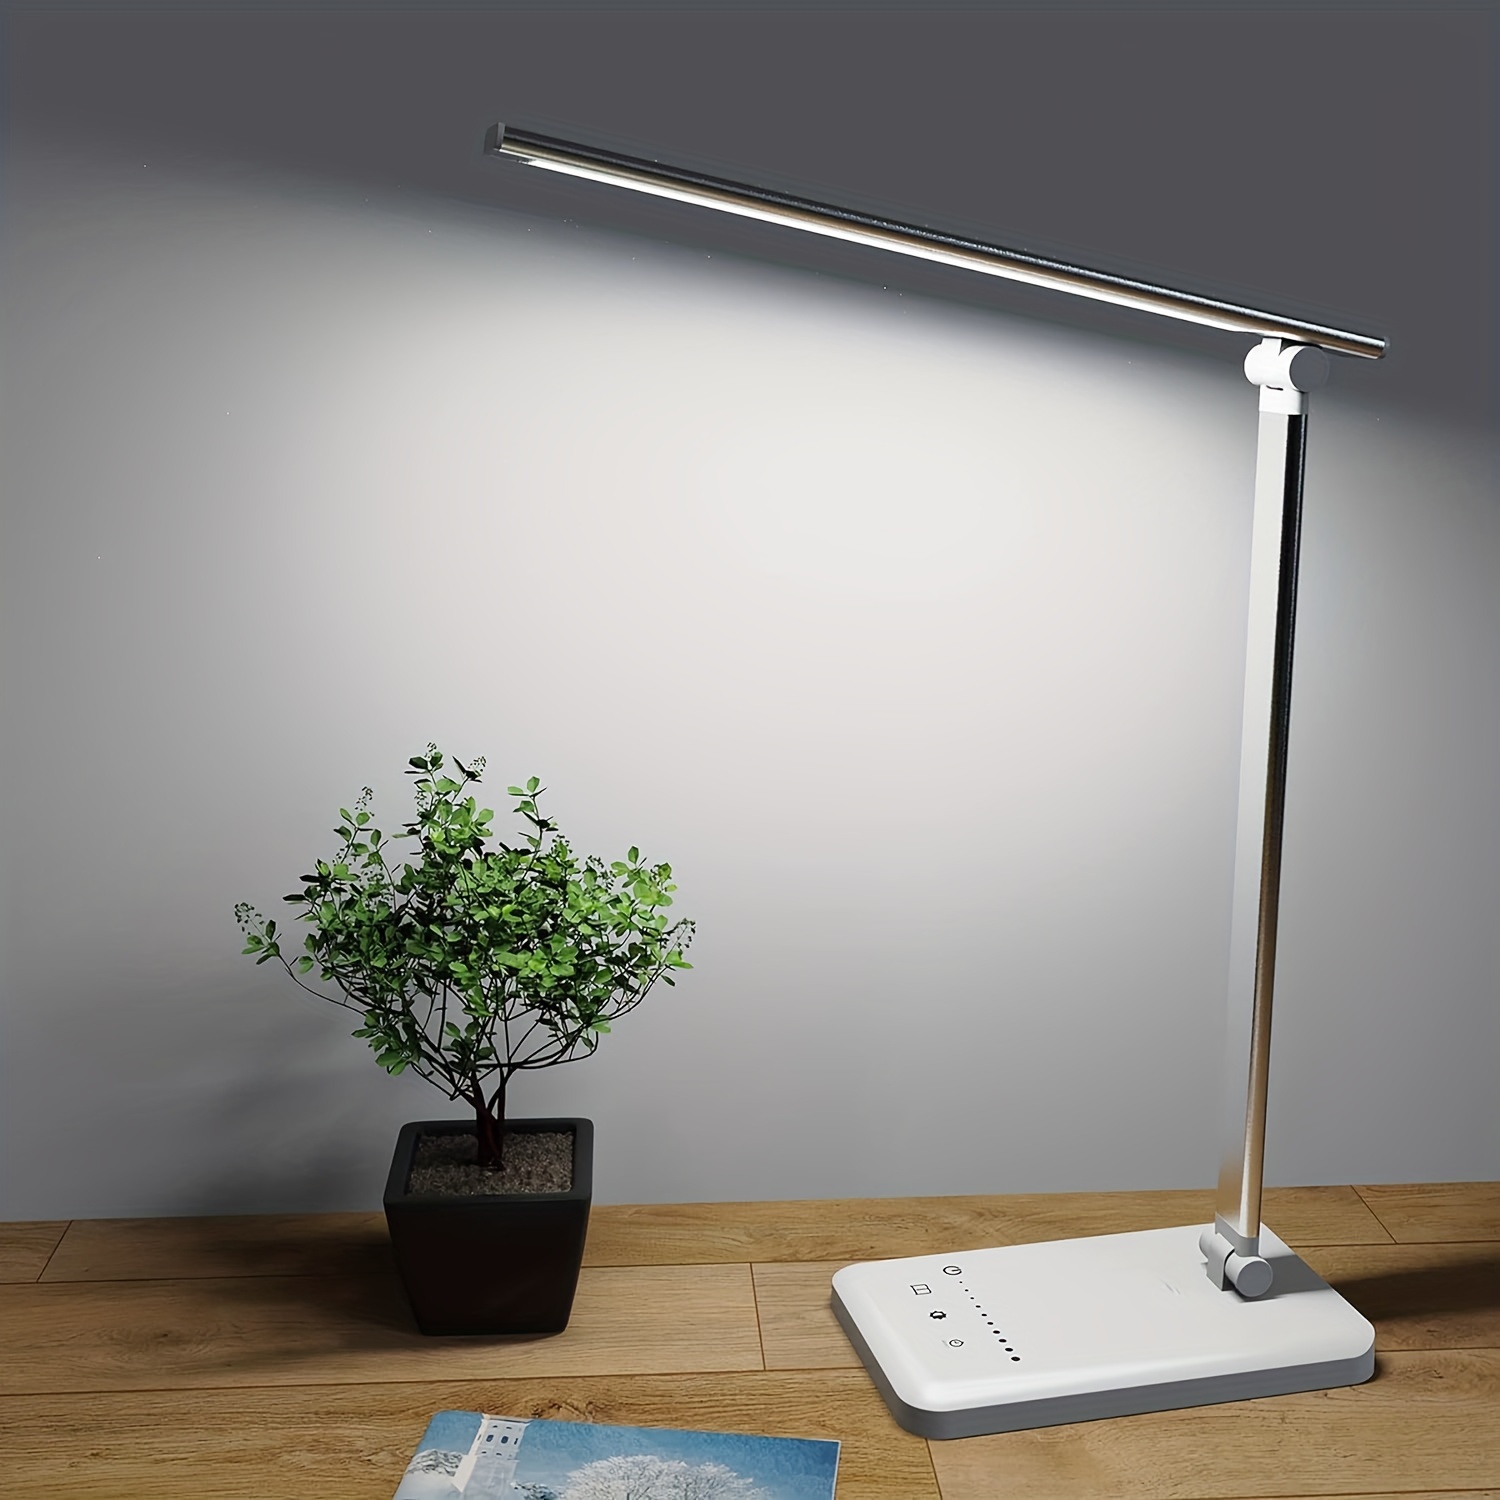 

Foldable Portable Led Desk Lamp For Home, Office, Bedroom, 5 Brightness Levels And 5 Color Temperatures(3000k-6500k) To Match Use